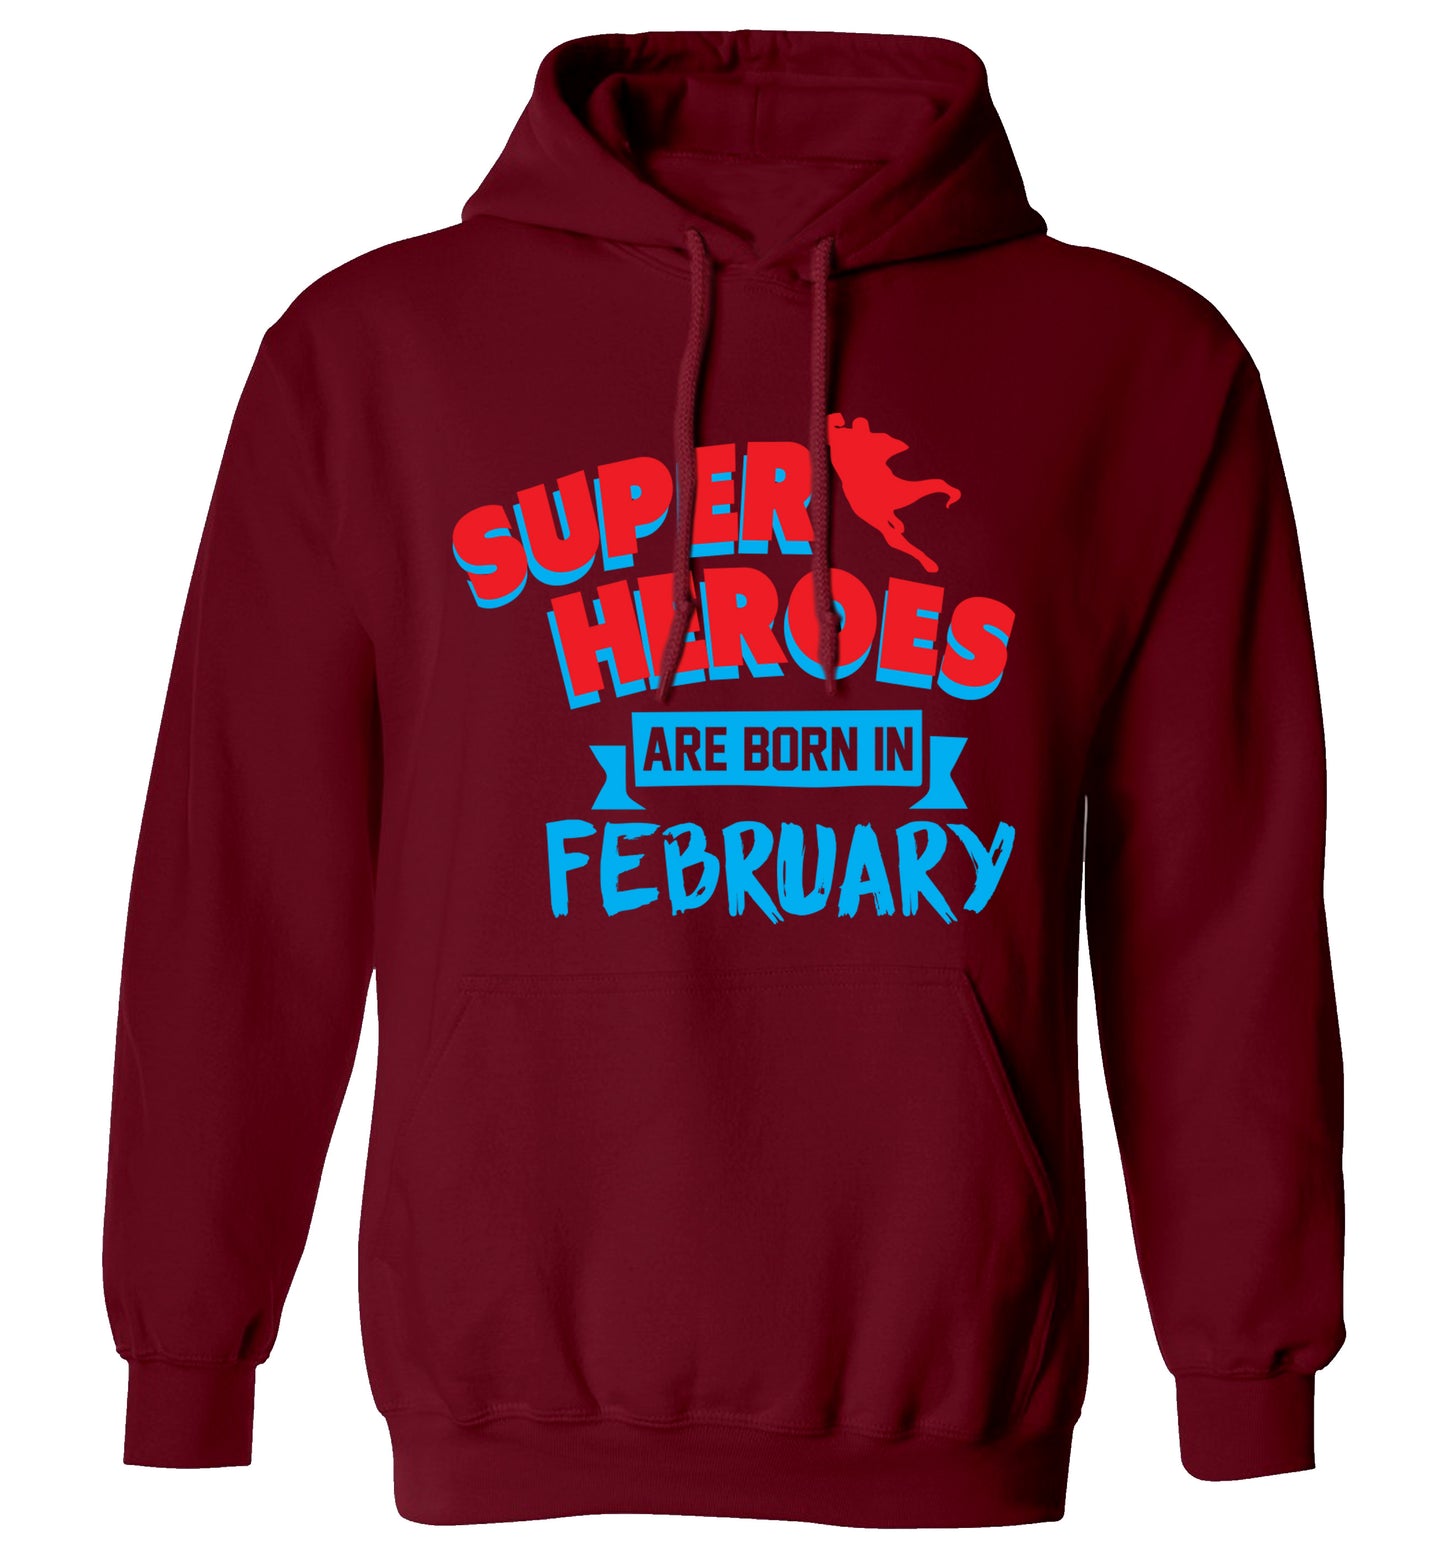 superheroes are born in February adults unisex maroon hoodie 2XL